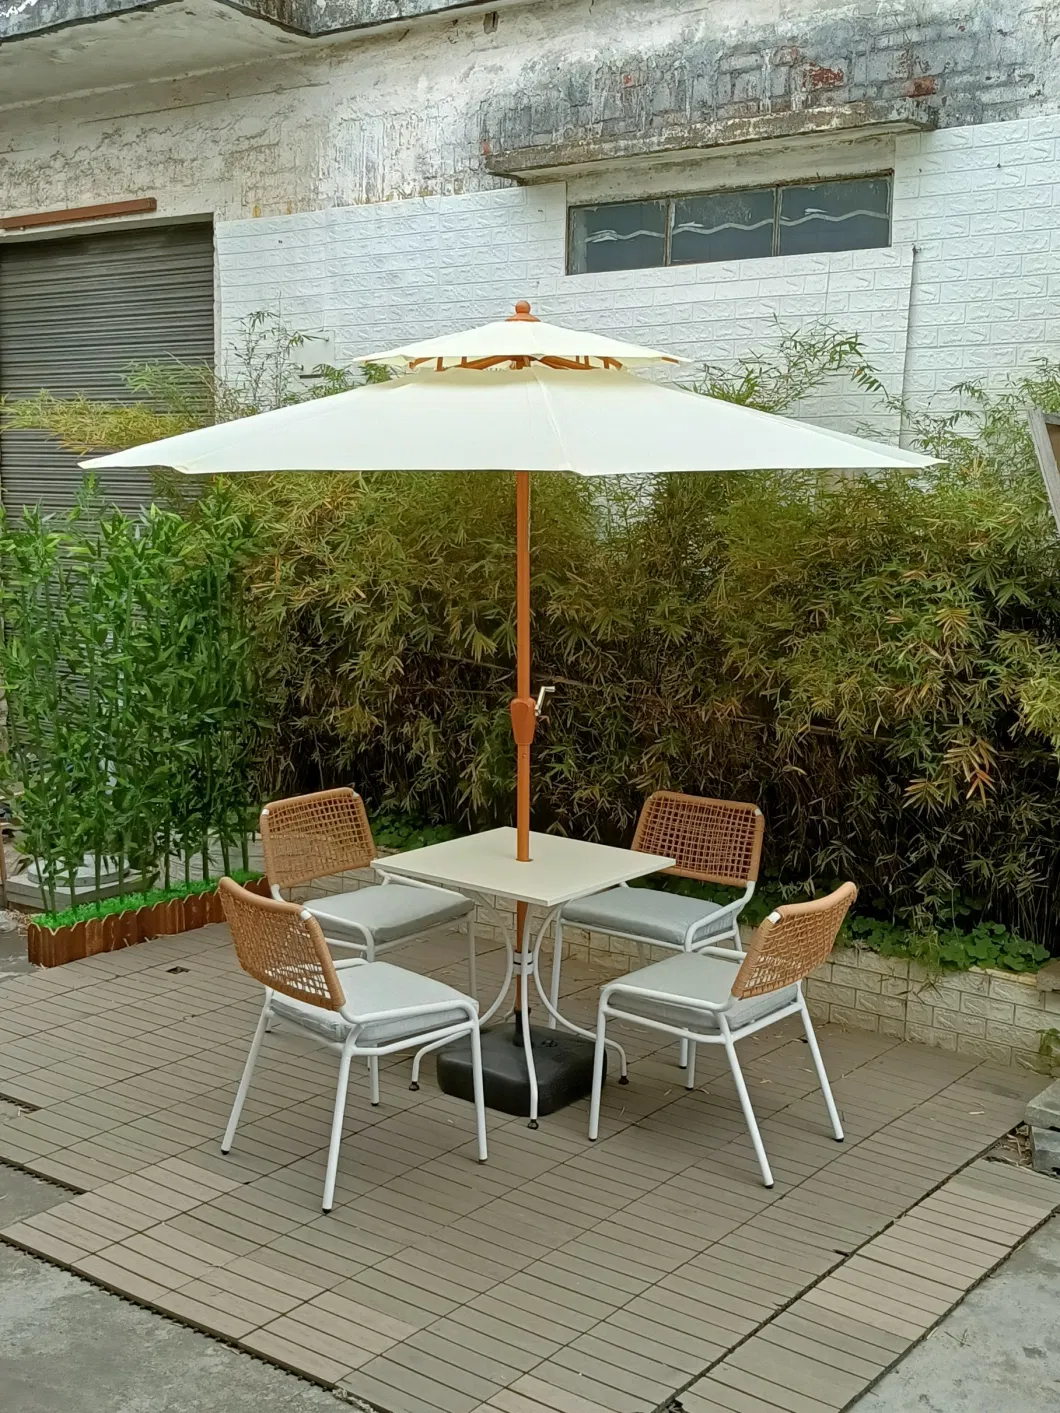 Garden Chair Manufacture Rope Weaving Woven Rope Patio Chair Modern Balcony Plastic String Chair Rattan Rope Outdoor Garden Dining Chair with Umbrella